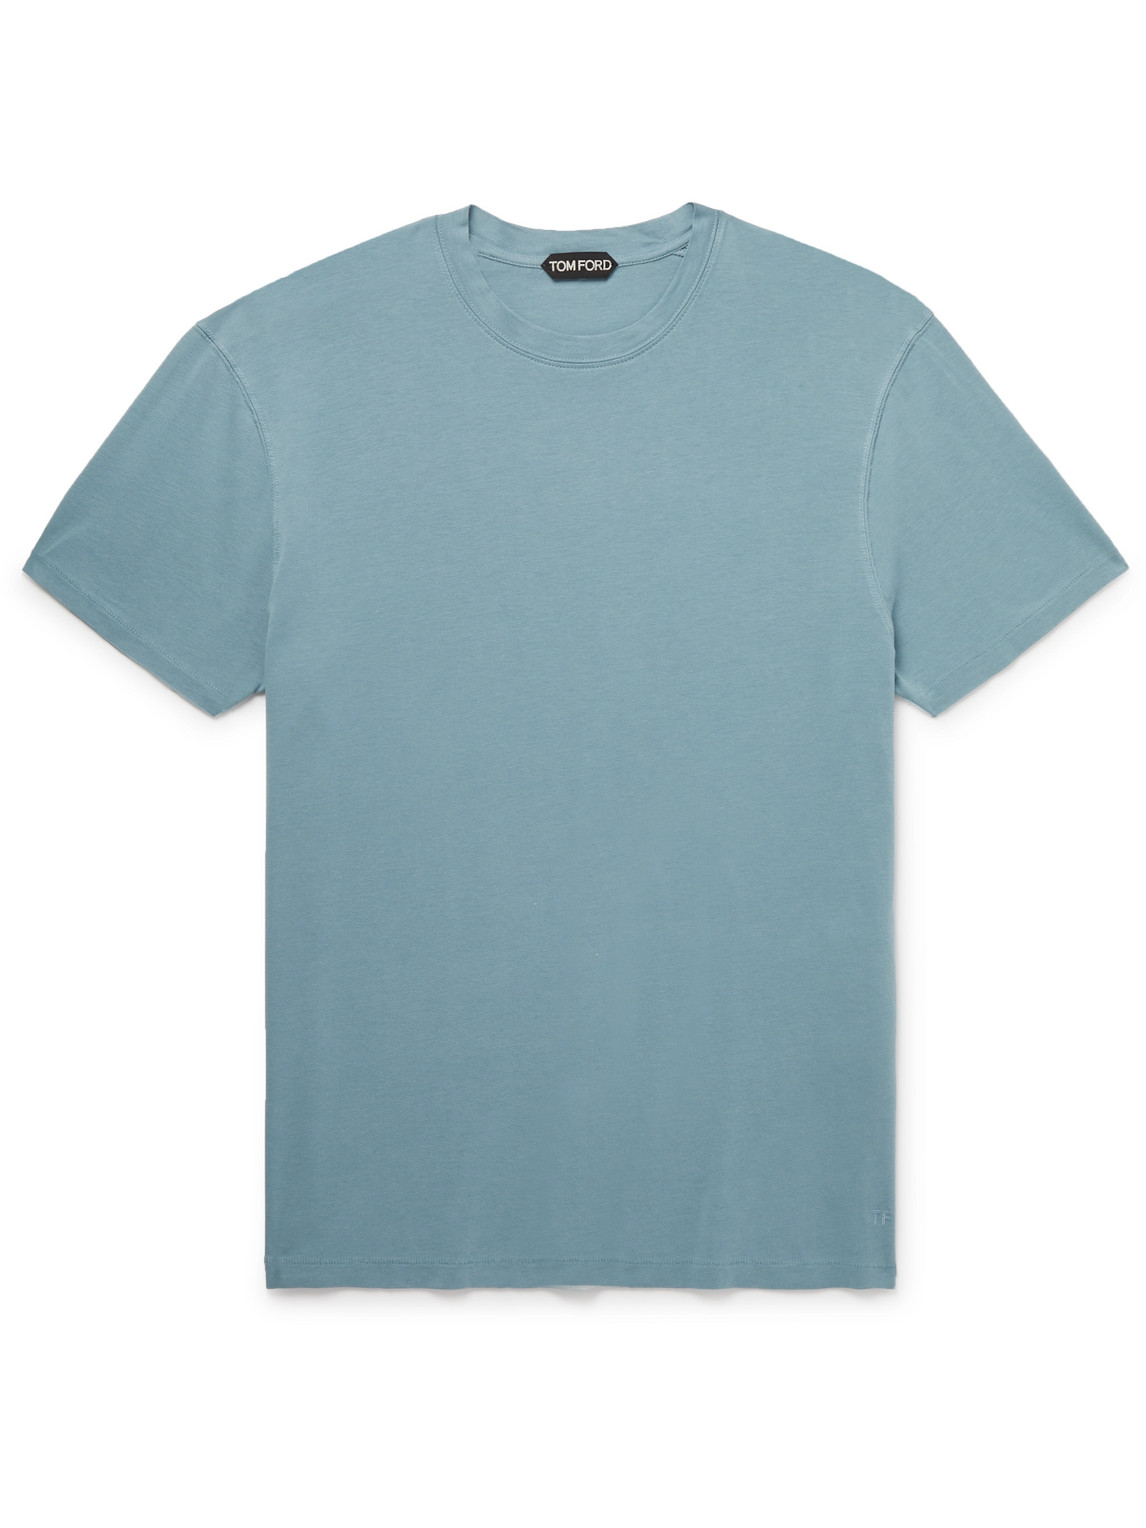 TOM FORD LYOCELL AND COTTON-BLEND JERSEY T-SHIRT